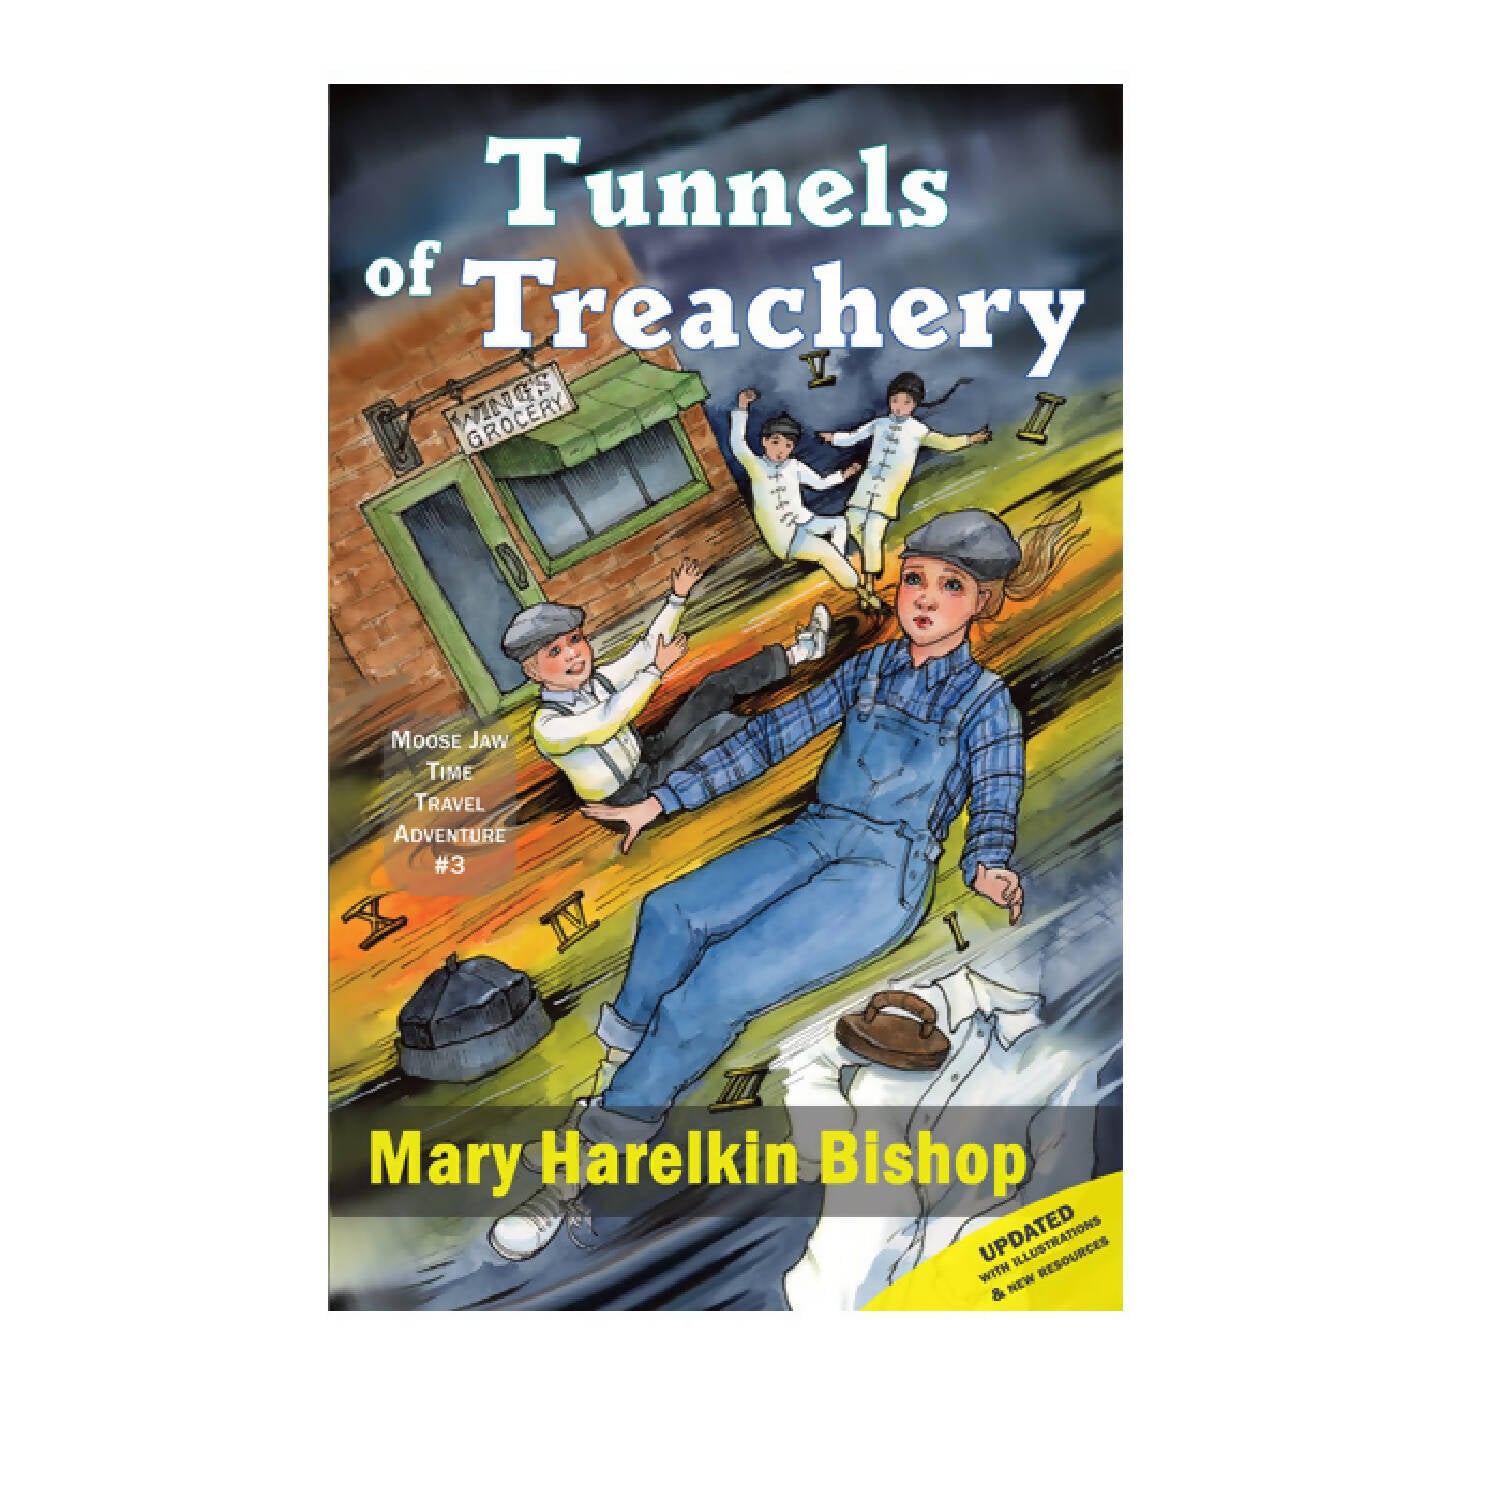 Tunnels of Treachery - Moose Jaw Time Travel Adventure #3 by Mary Harelkin Bishop